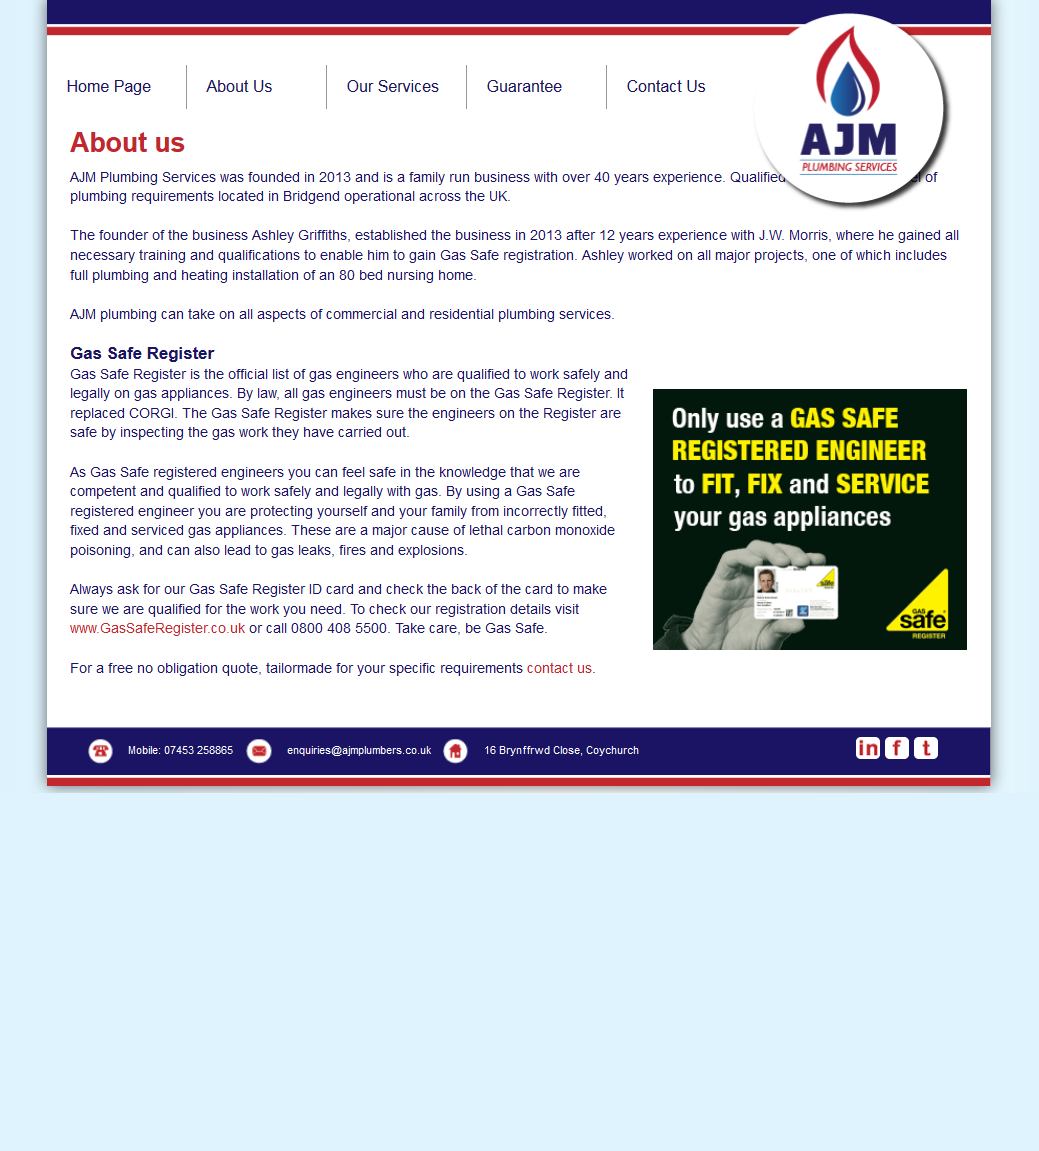 An image from the AJM Plumbing website